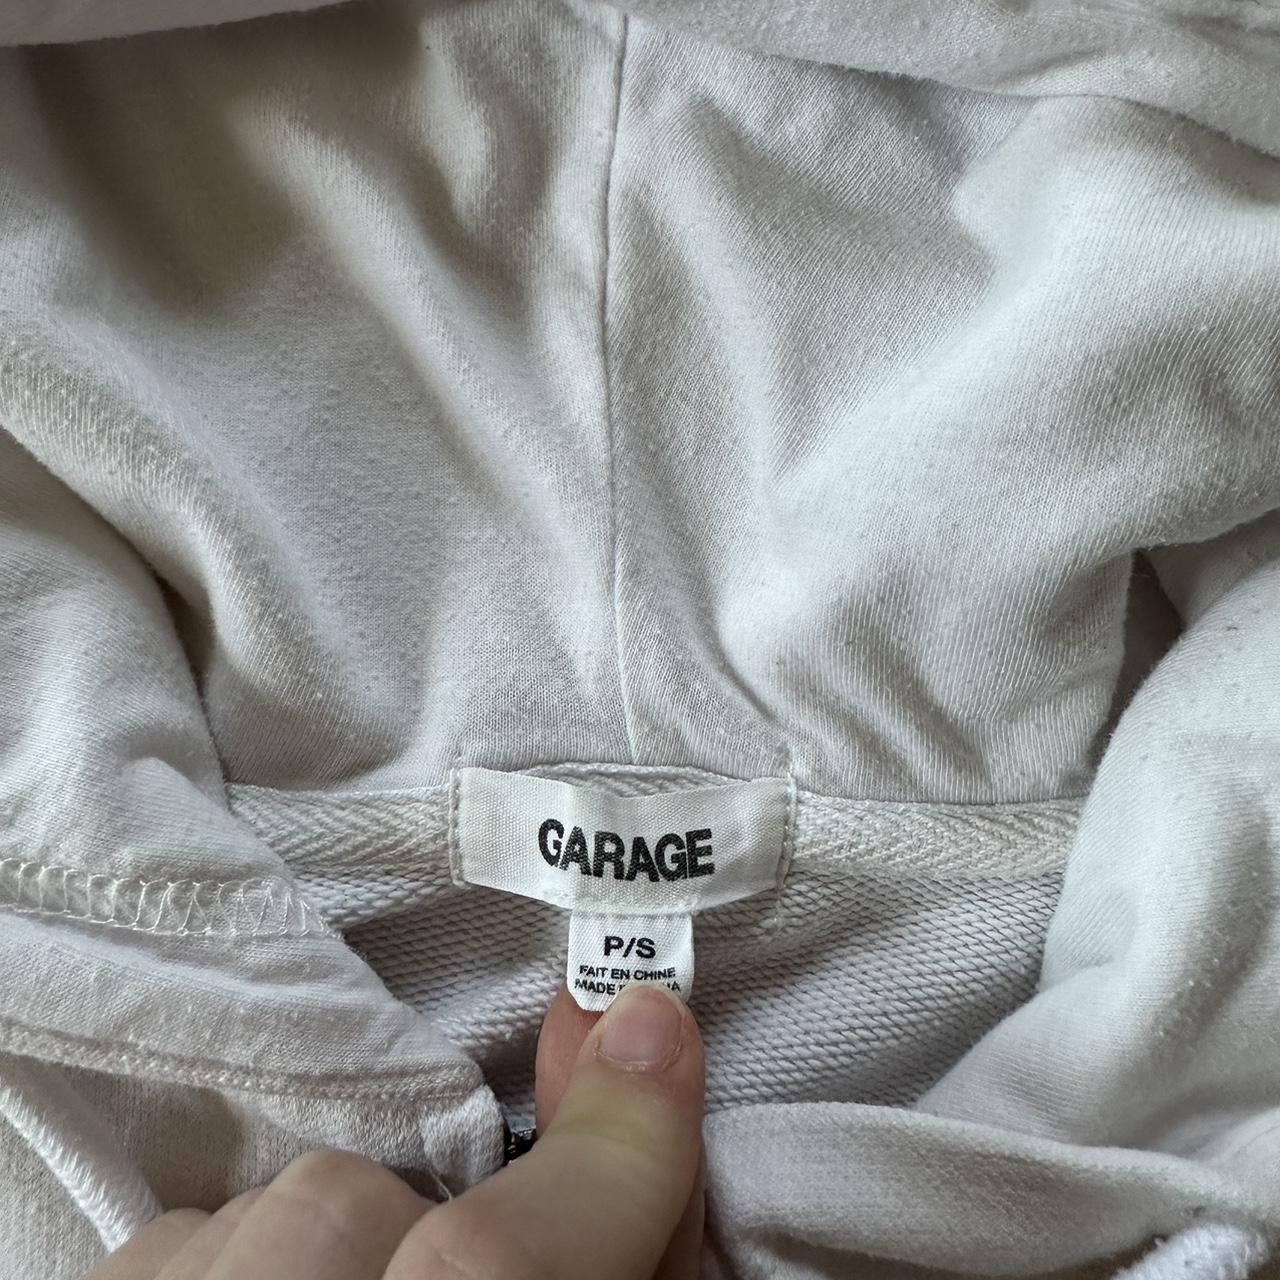 Garage cropped zip up - white - size s (would fit... - Depop